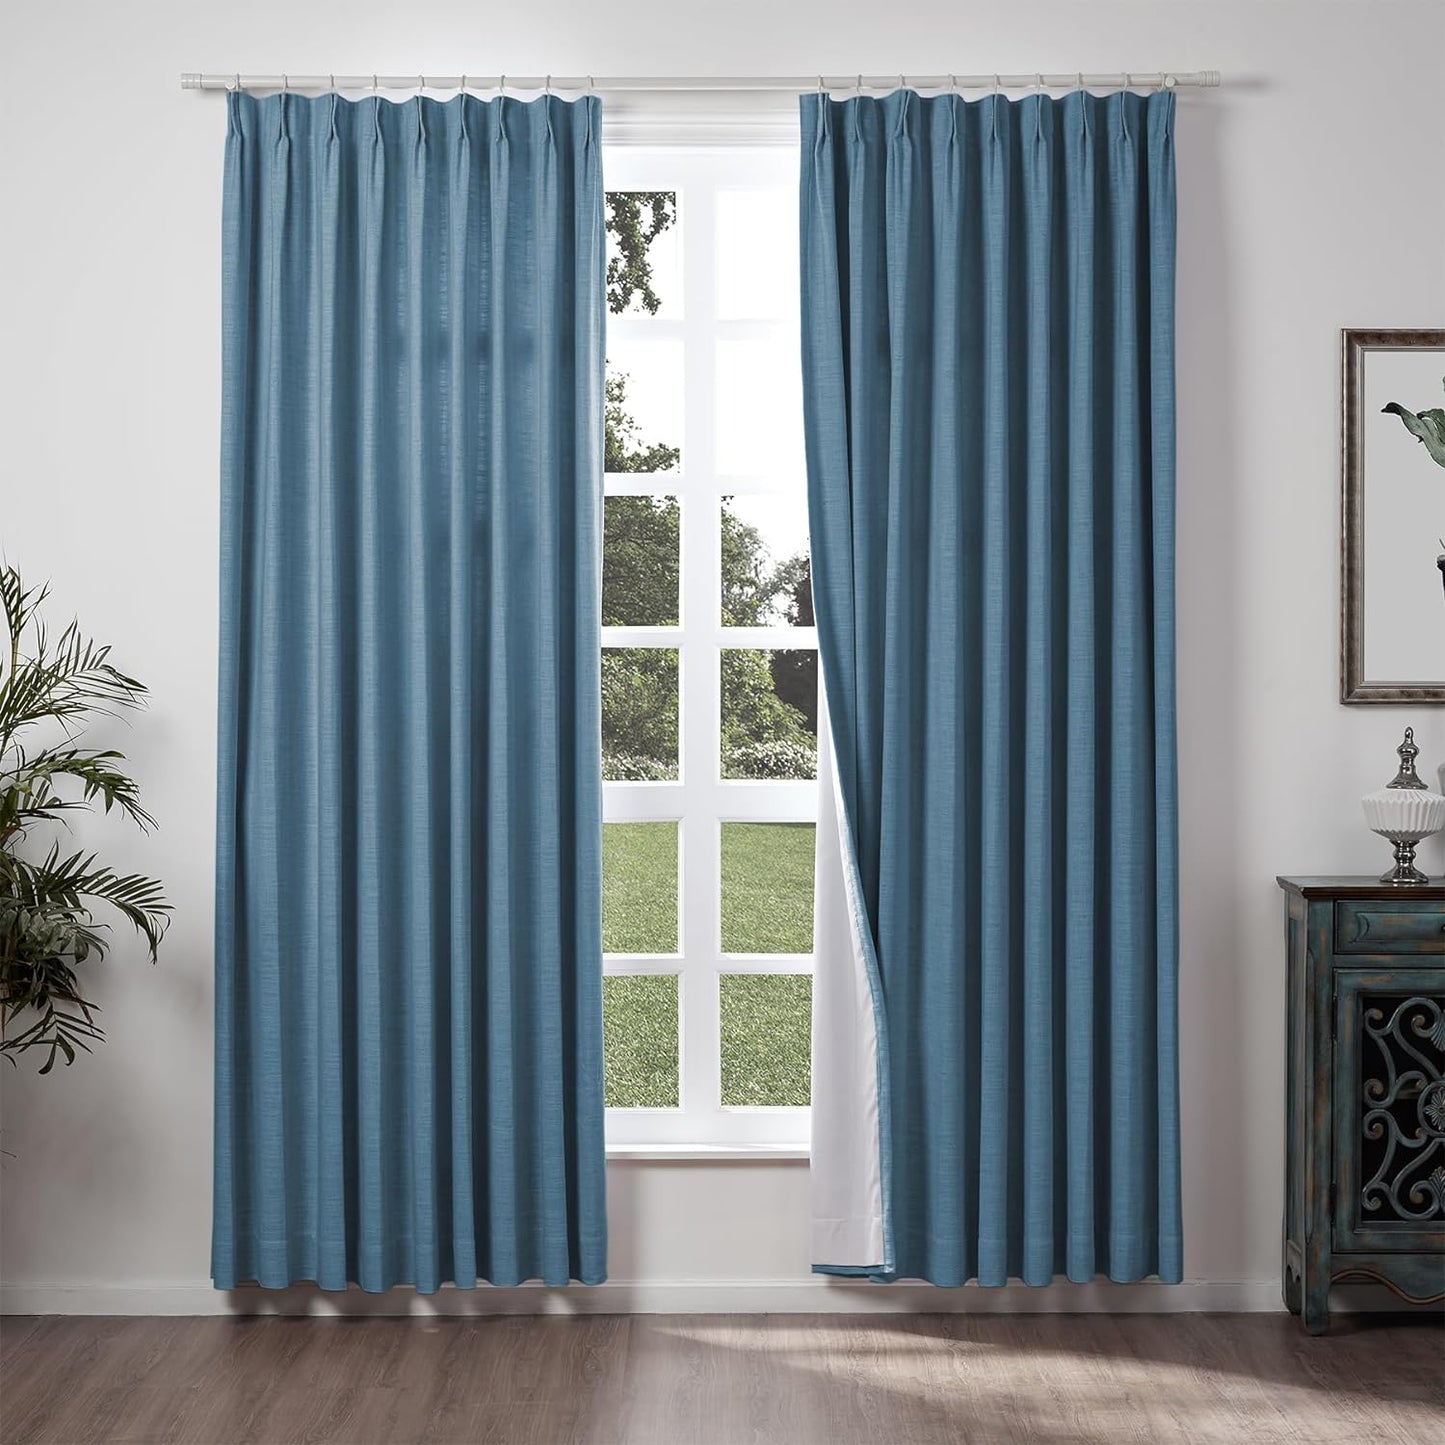 Chadmade 50" W X 84" L Polyester Linen Drape with Blackout Lining Pinch Pleat Curtain for Sliding Door Patio Door Living Room Bedroom, (1 Panel) Beige White Liz Collection  ChadMade Aegean Blue (35) 72Wx84L 